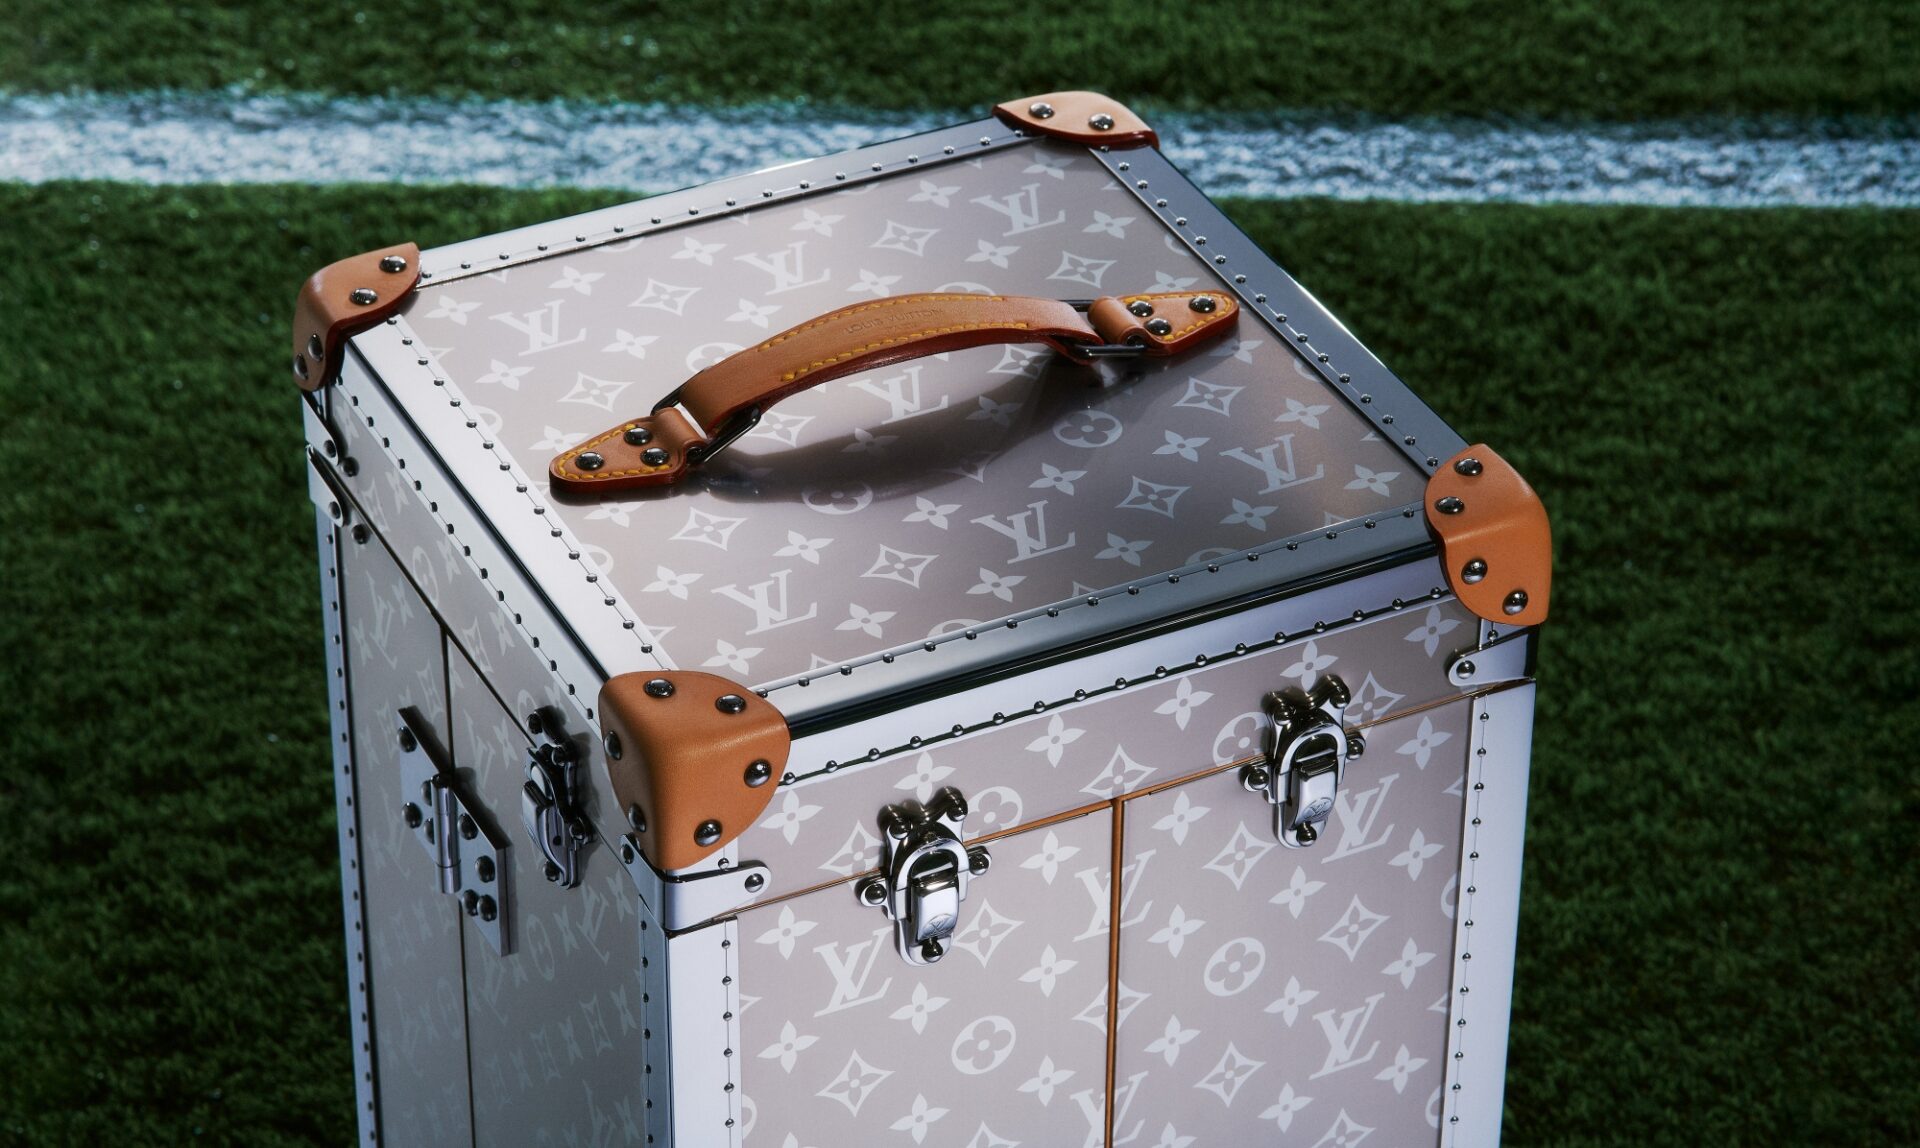 Louis Vuitton's World Cup Gear Is Once-Every-Four-Years Luxurious